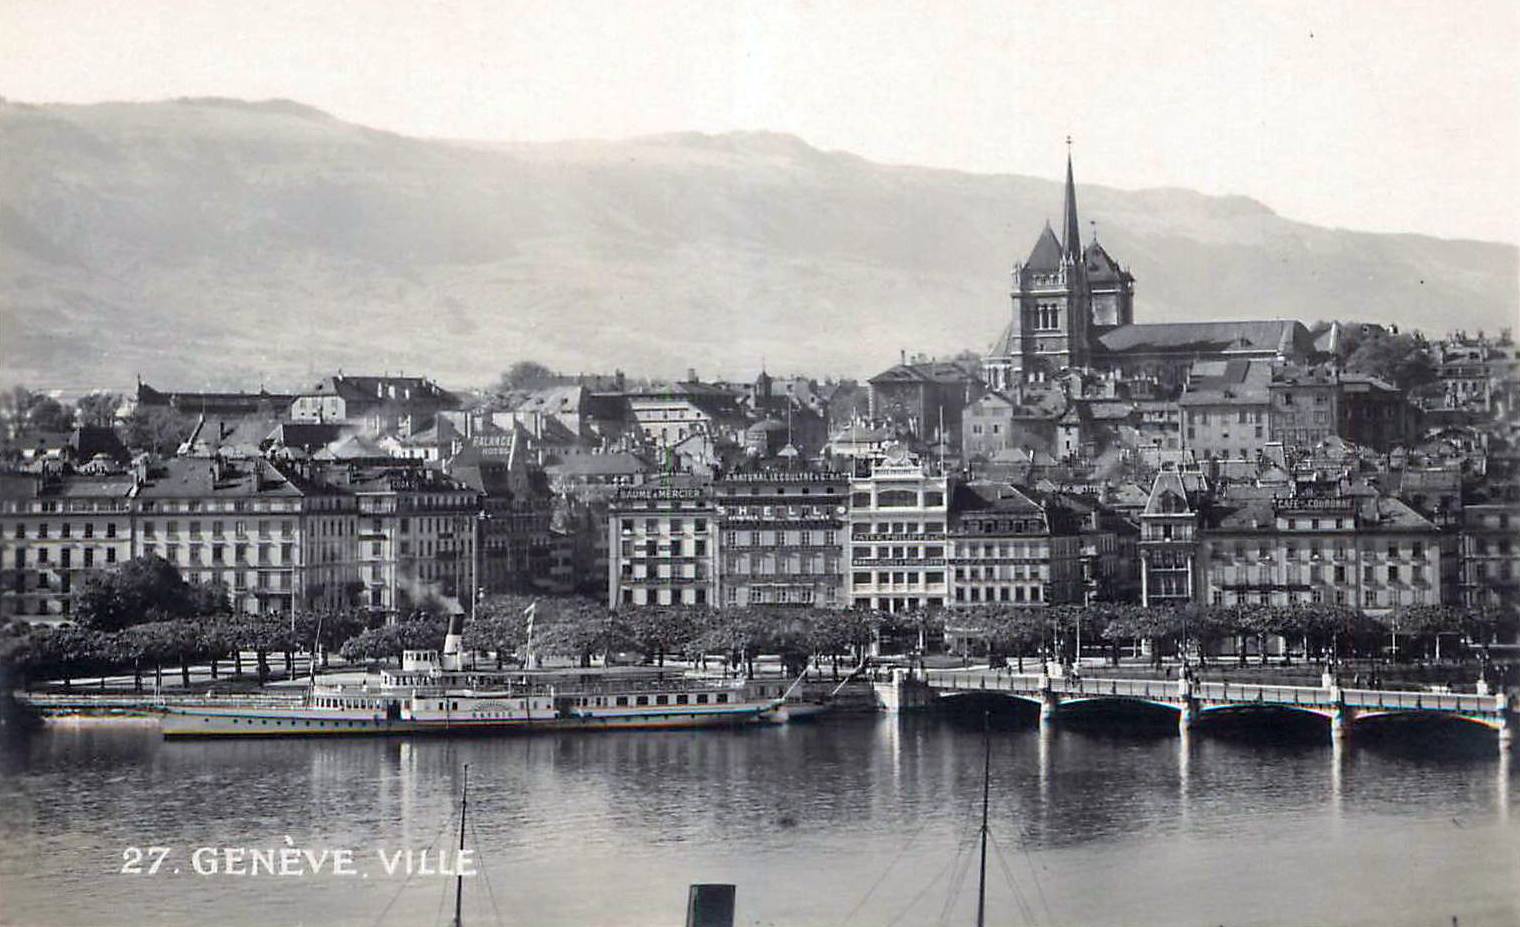 Vintage postcard of Geneva with a view over the Old Town and Cathedral de St Pierre with in the background the Salève; in black and white.